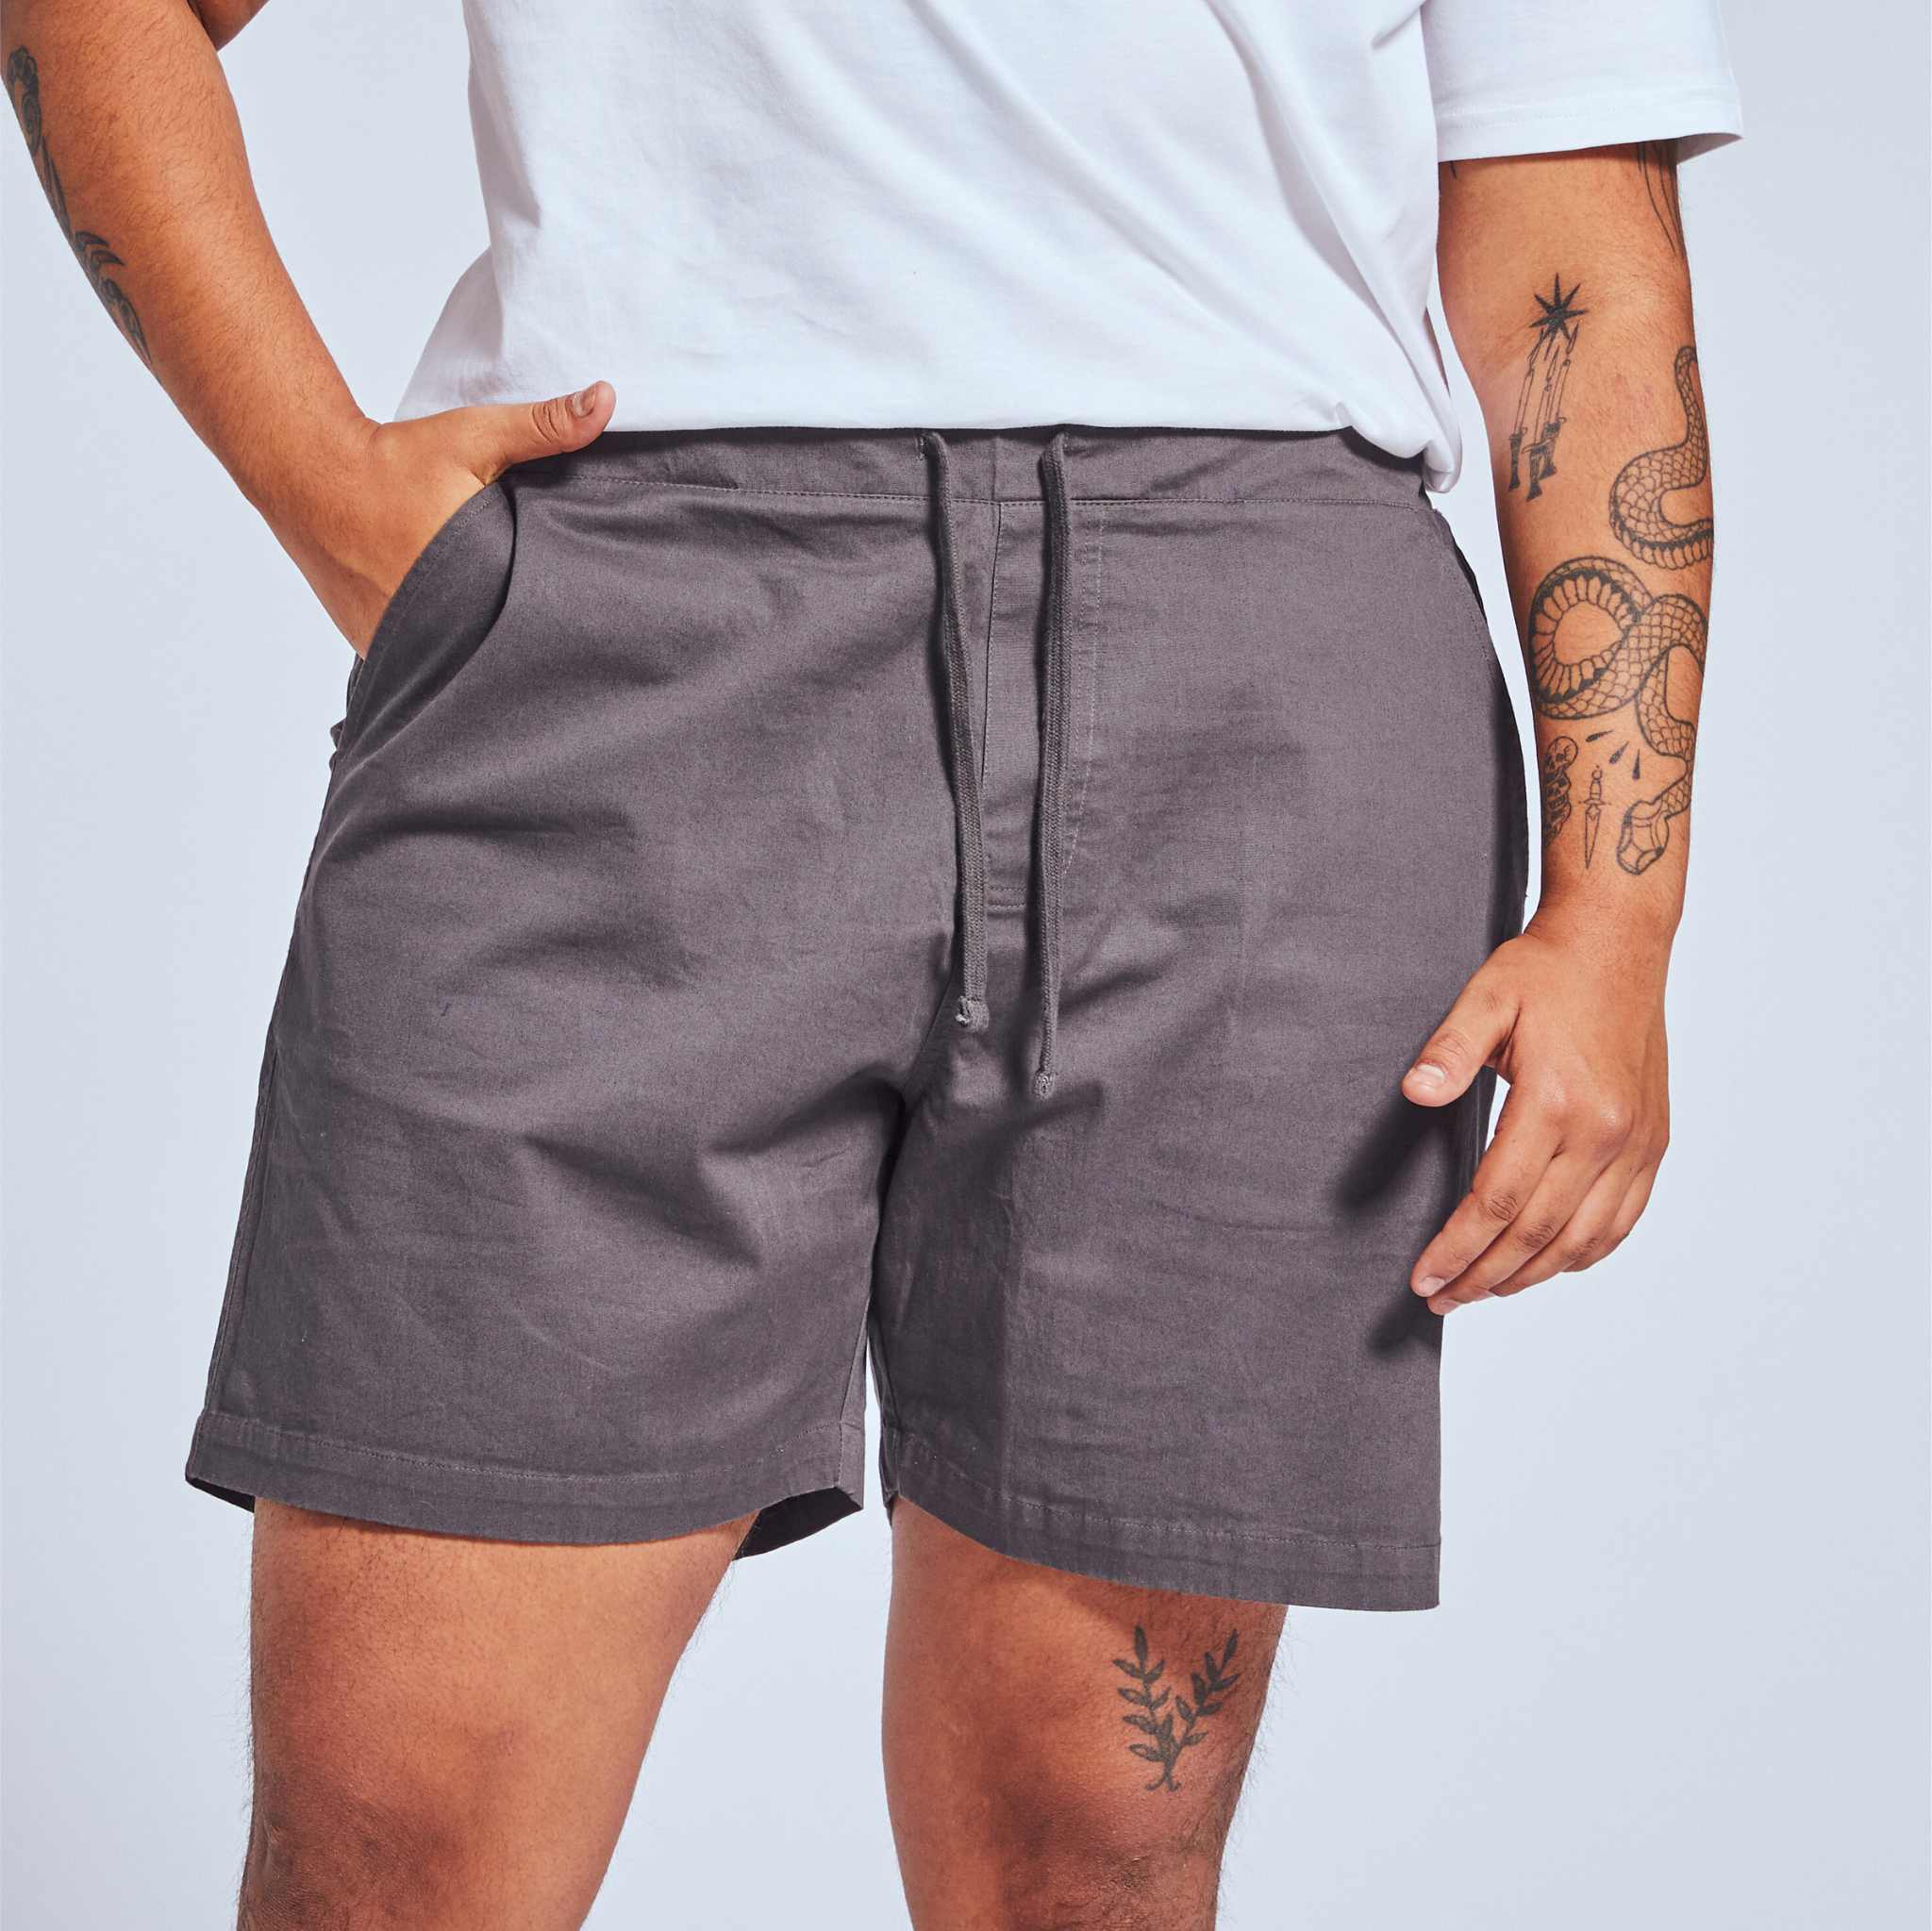 Gray Deep Pocket Shorts for Women with White T-Shirt